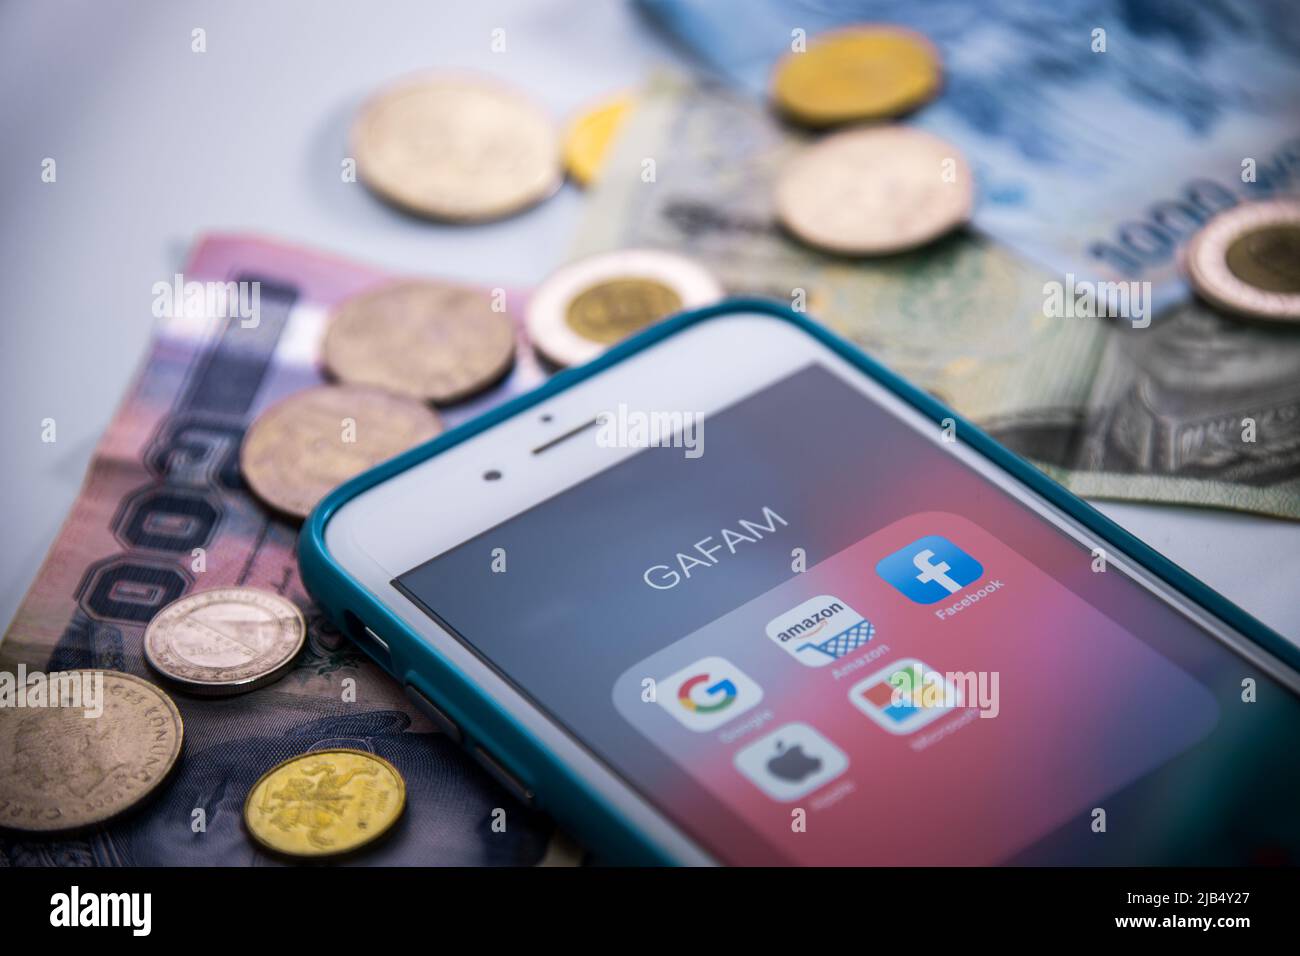 GAFAM on iPhone with coins & bills. Google, Amazon, Facebook, Apple & Microsoft are 5 US IT or online service companies dominated cyberspace in 2010s Stock Photo